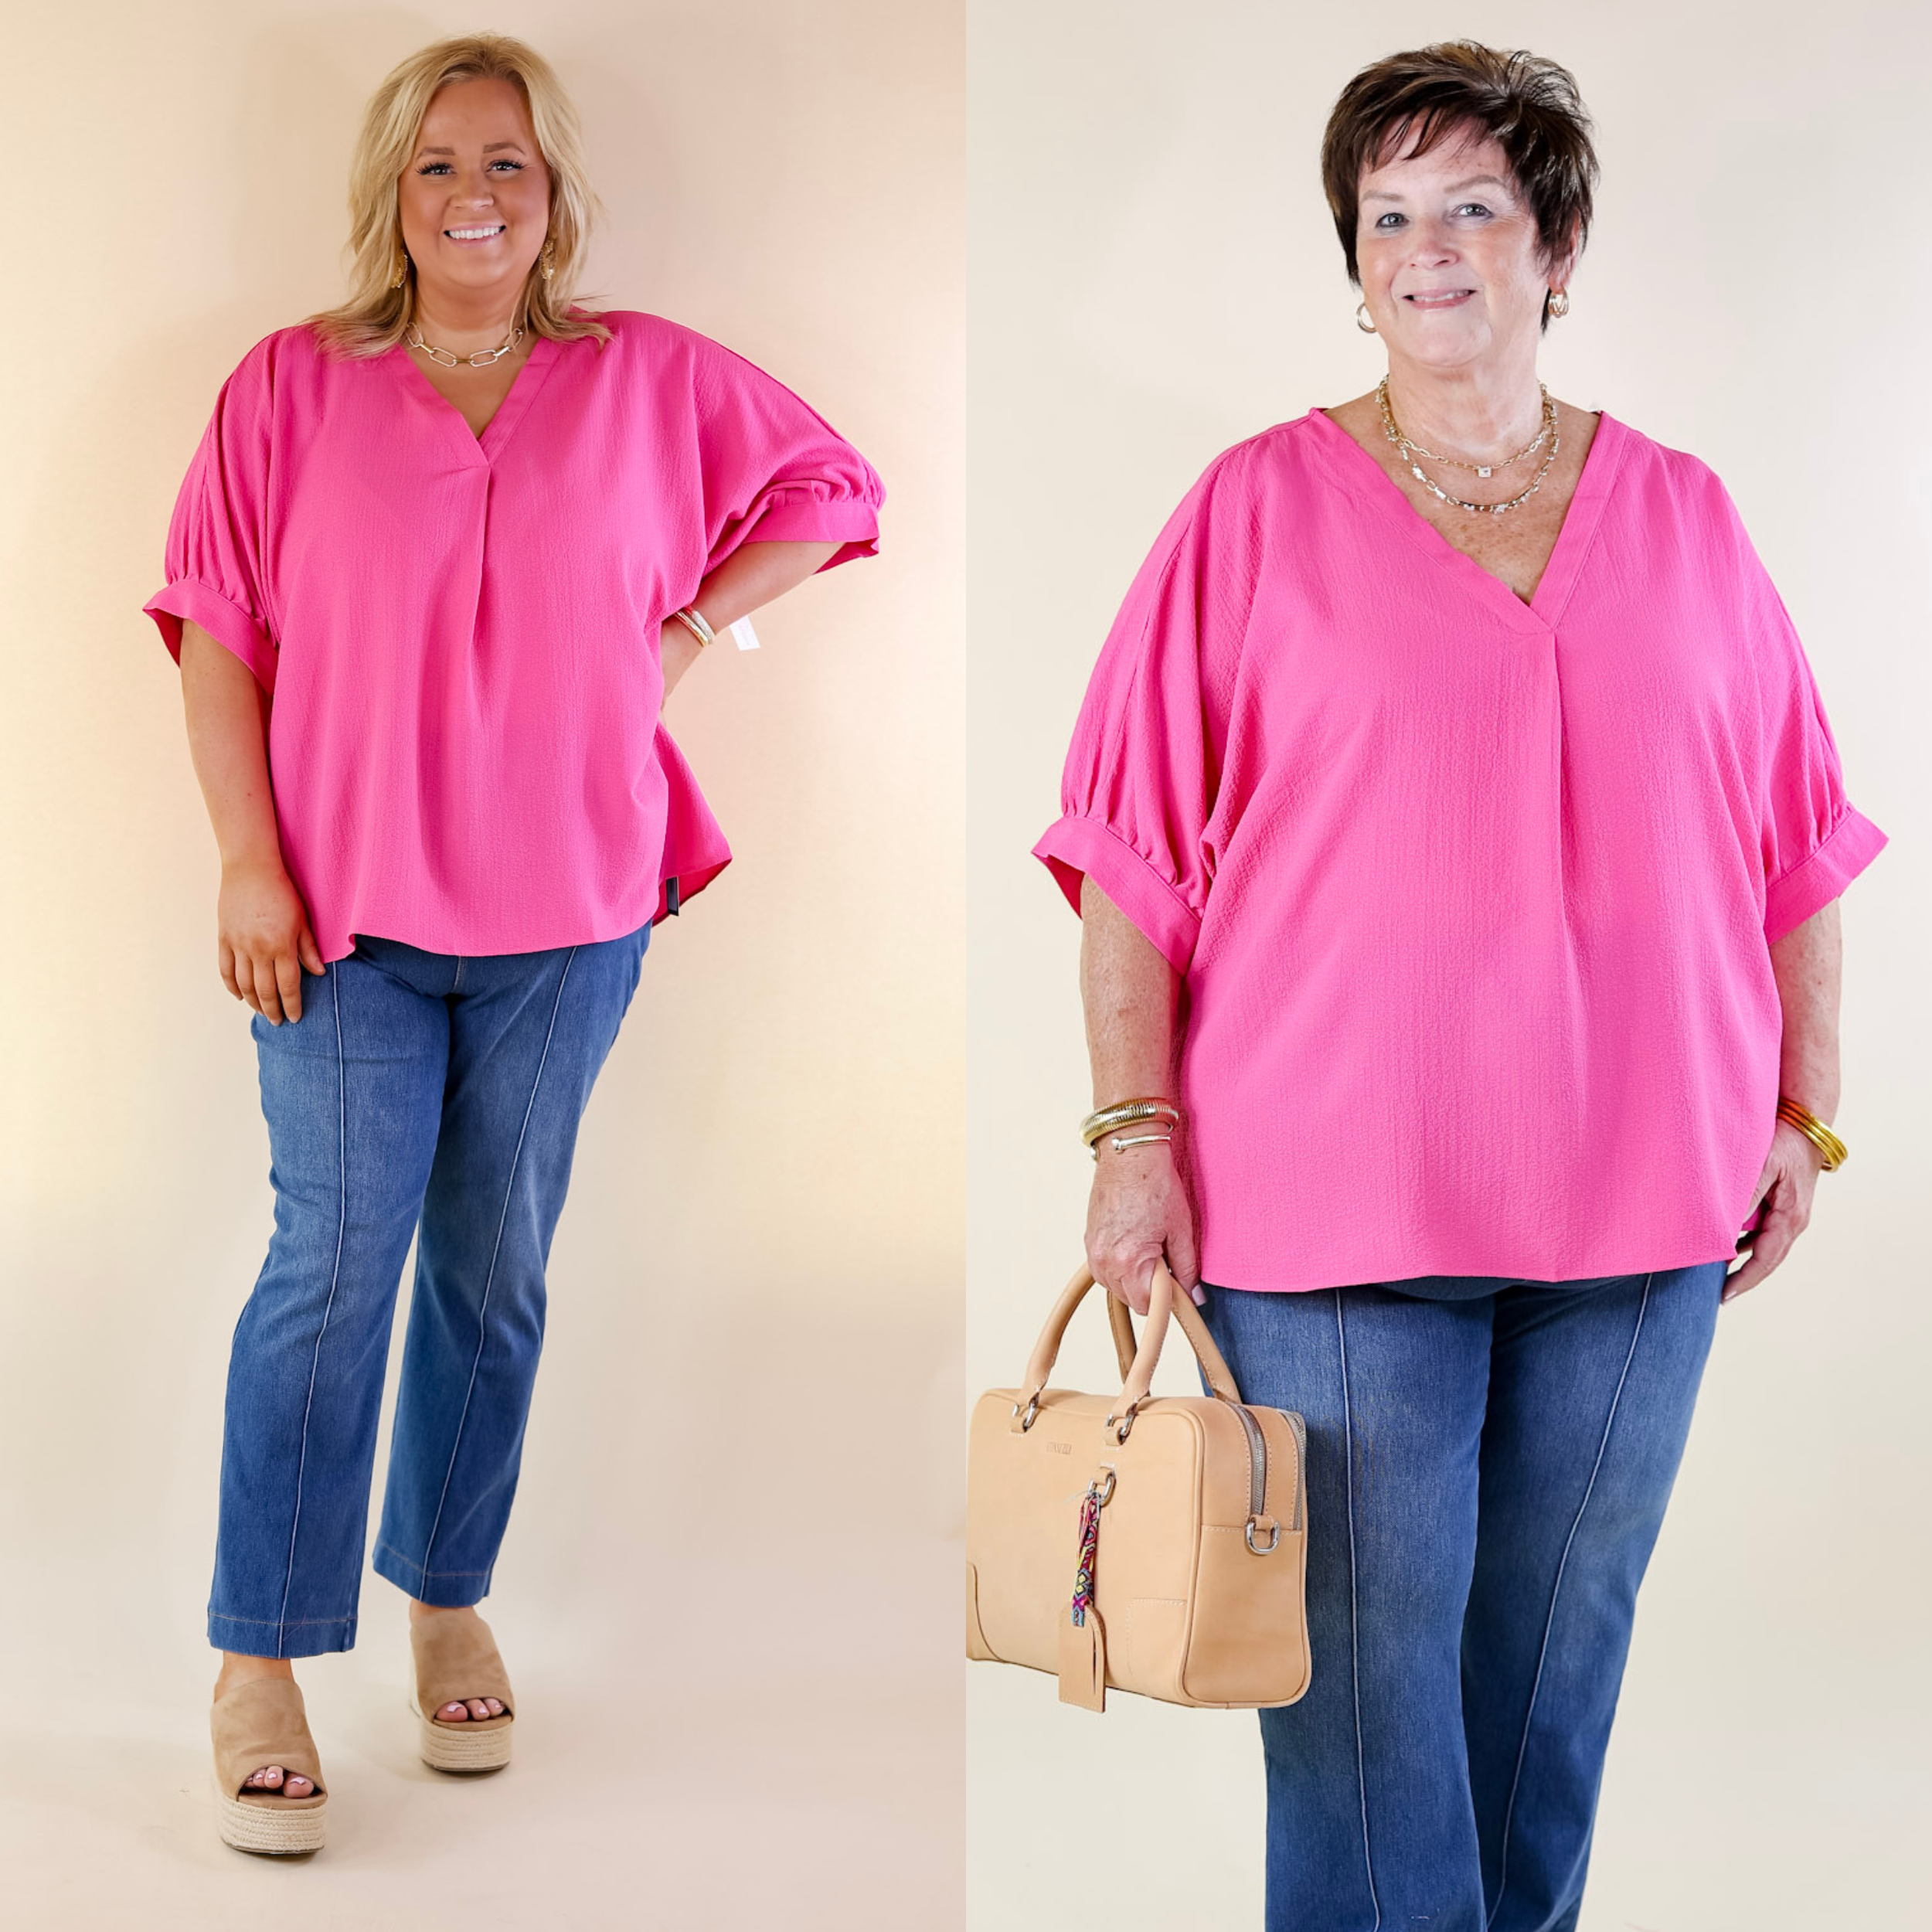 Chic and Charming V Neck Top with 3/4 Sleeves in Hot Pink